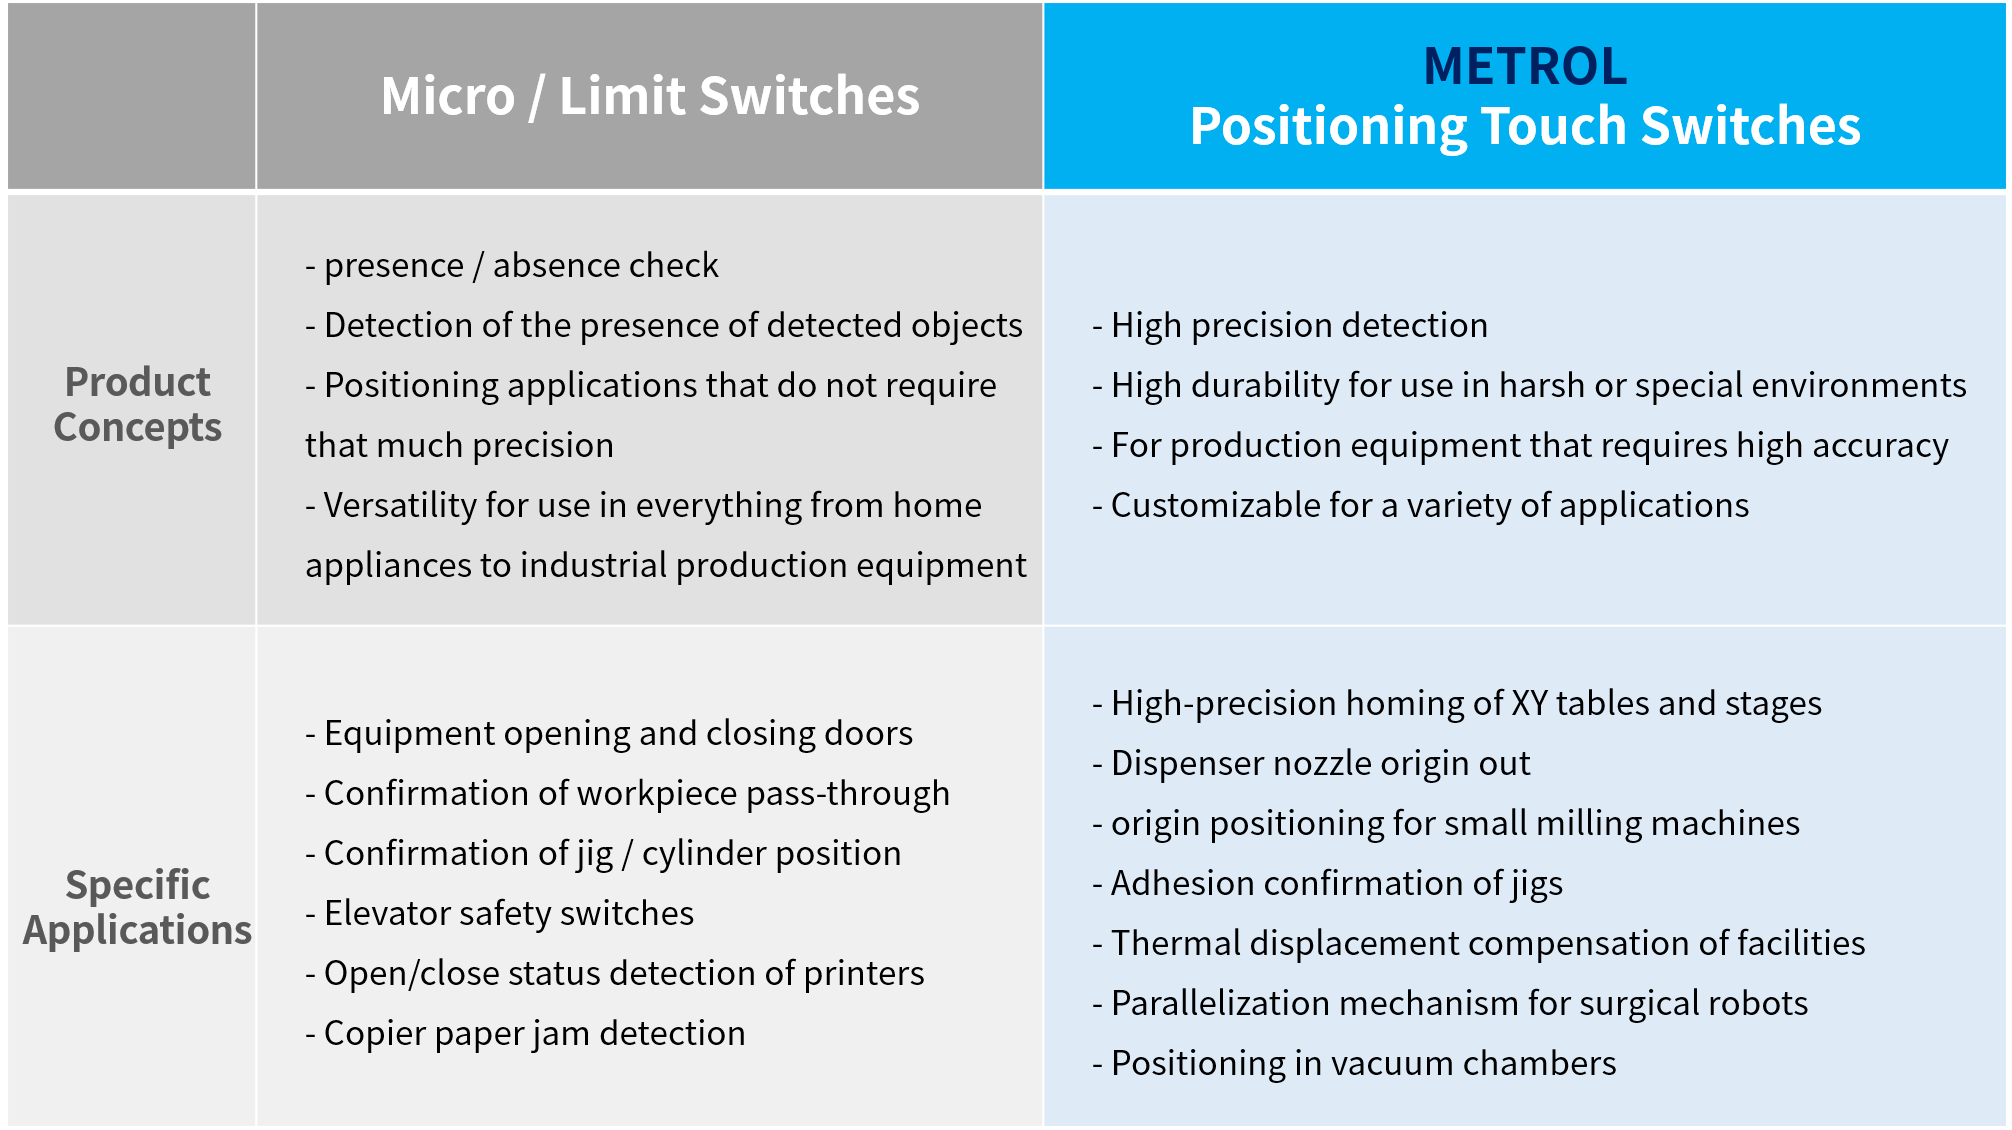 product concepts and specific applications for Micro, Limit, Touch switches